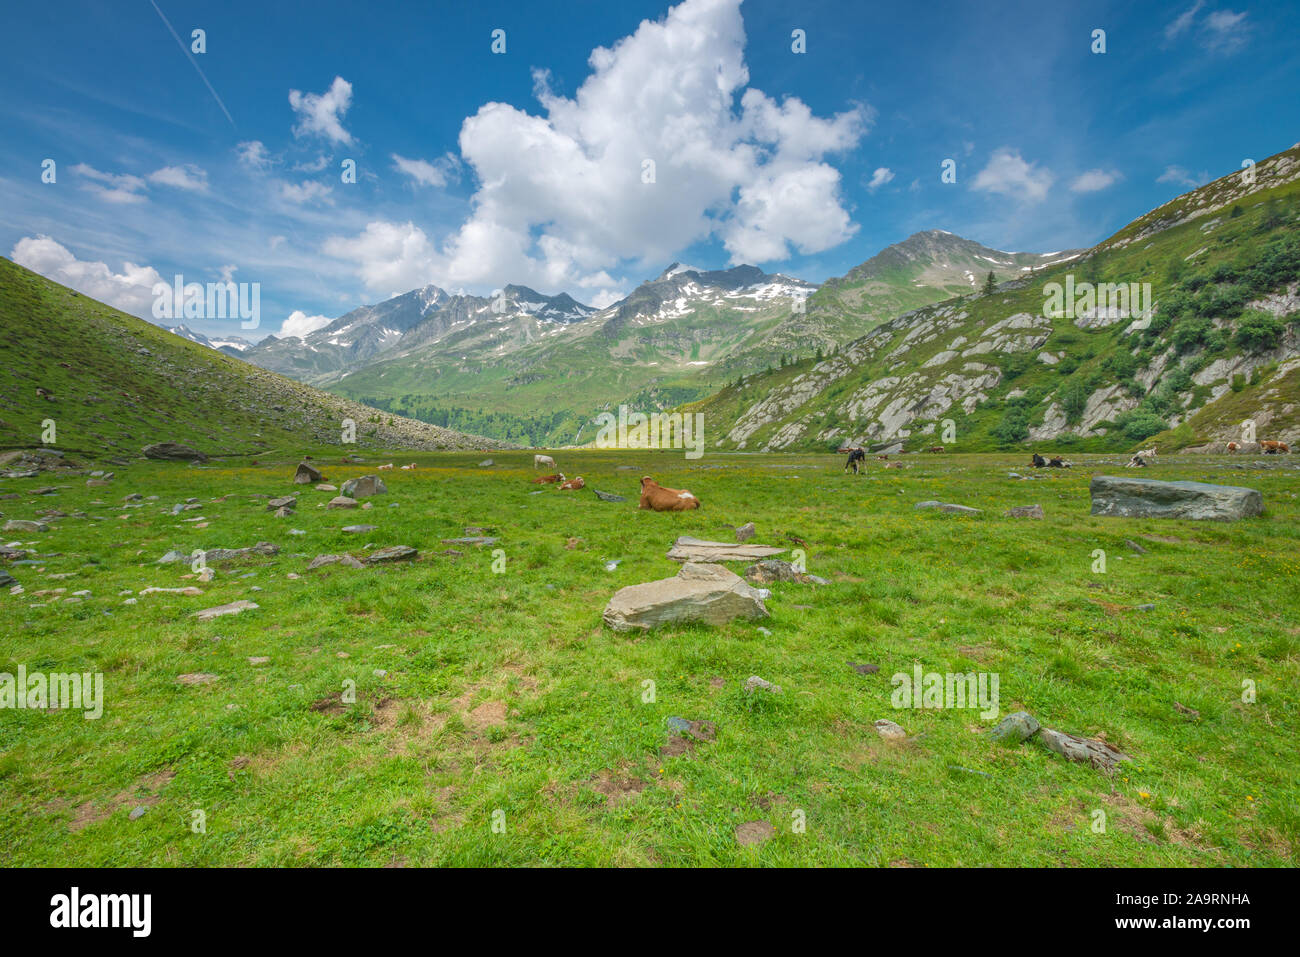 Free ranging cows, cattle grazing on alpine pasture. Cows in alpine meadow surrounded by mountains. Typical Italian mountain cows. Stock Photo